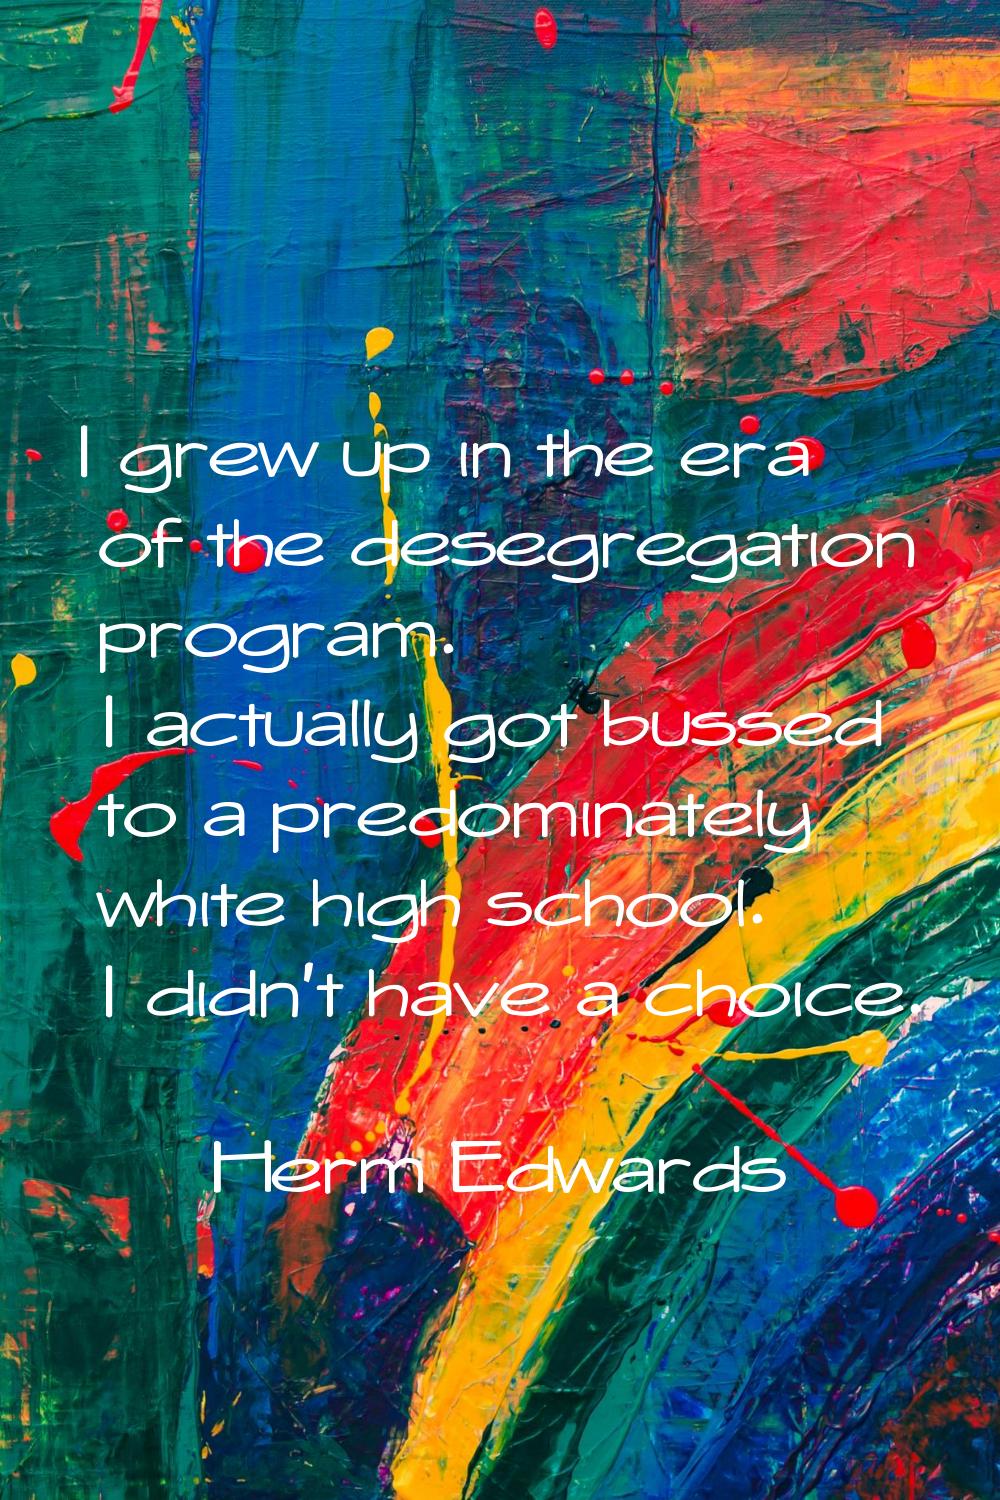 I grew up in the era of the desegregation program. I actually got bussed to a predominately white h